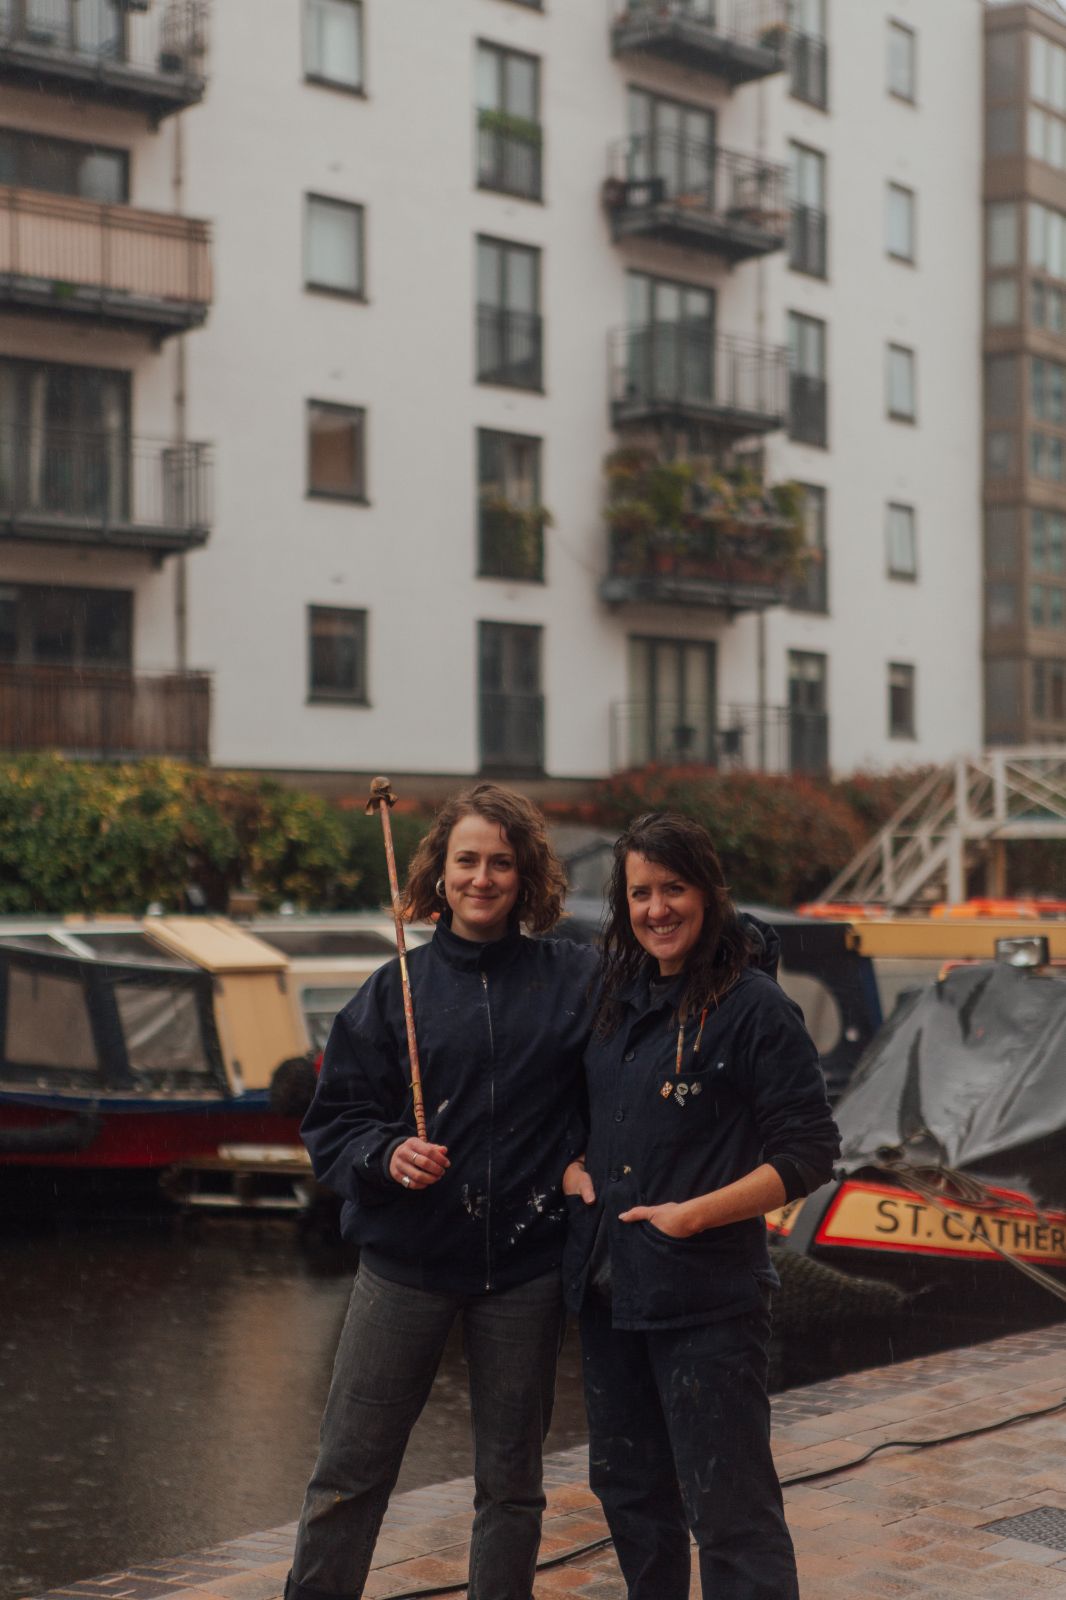 Two female signwriters in dark work clothing, one holds a mahl stick. They sand in front of a wharf with narrow boats.